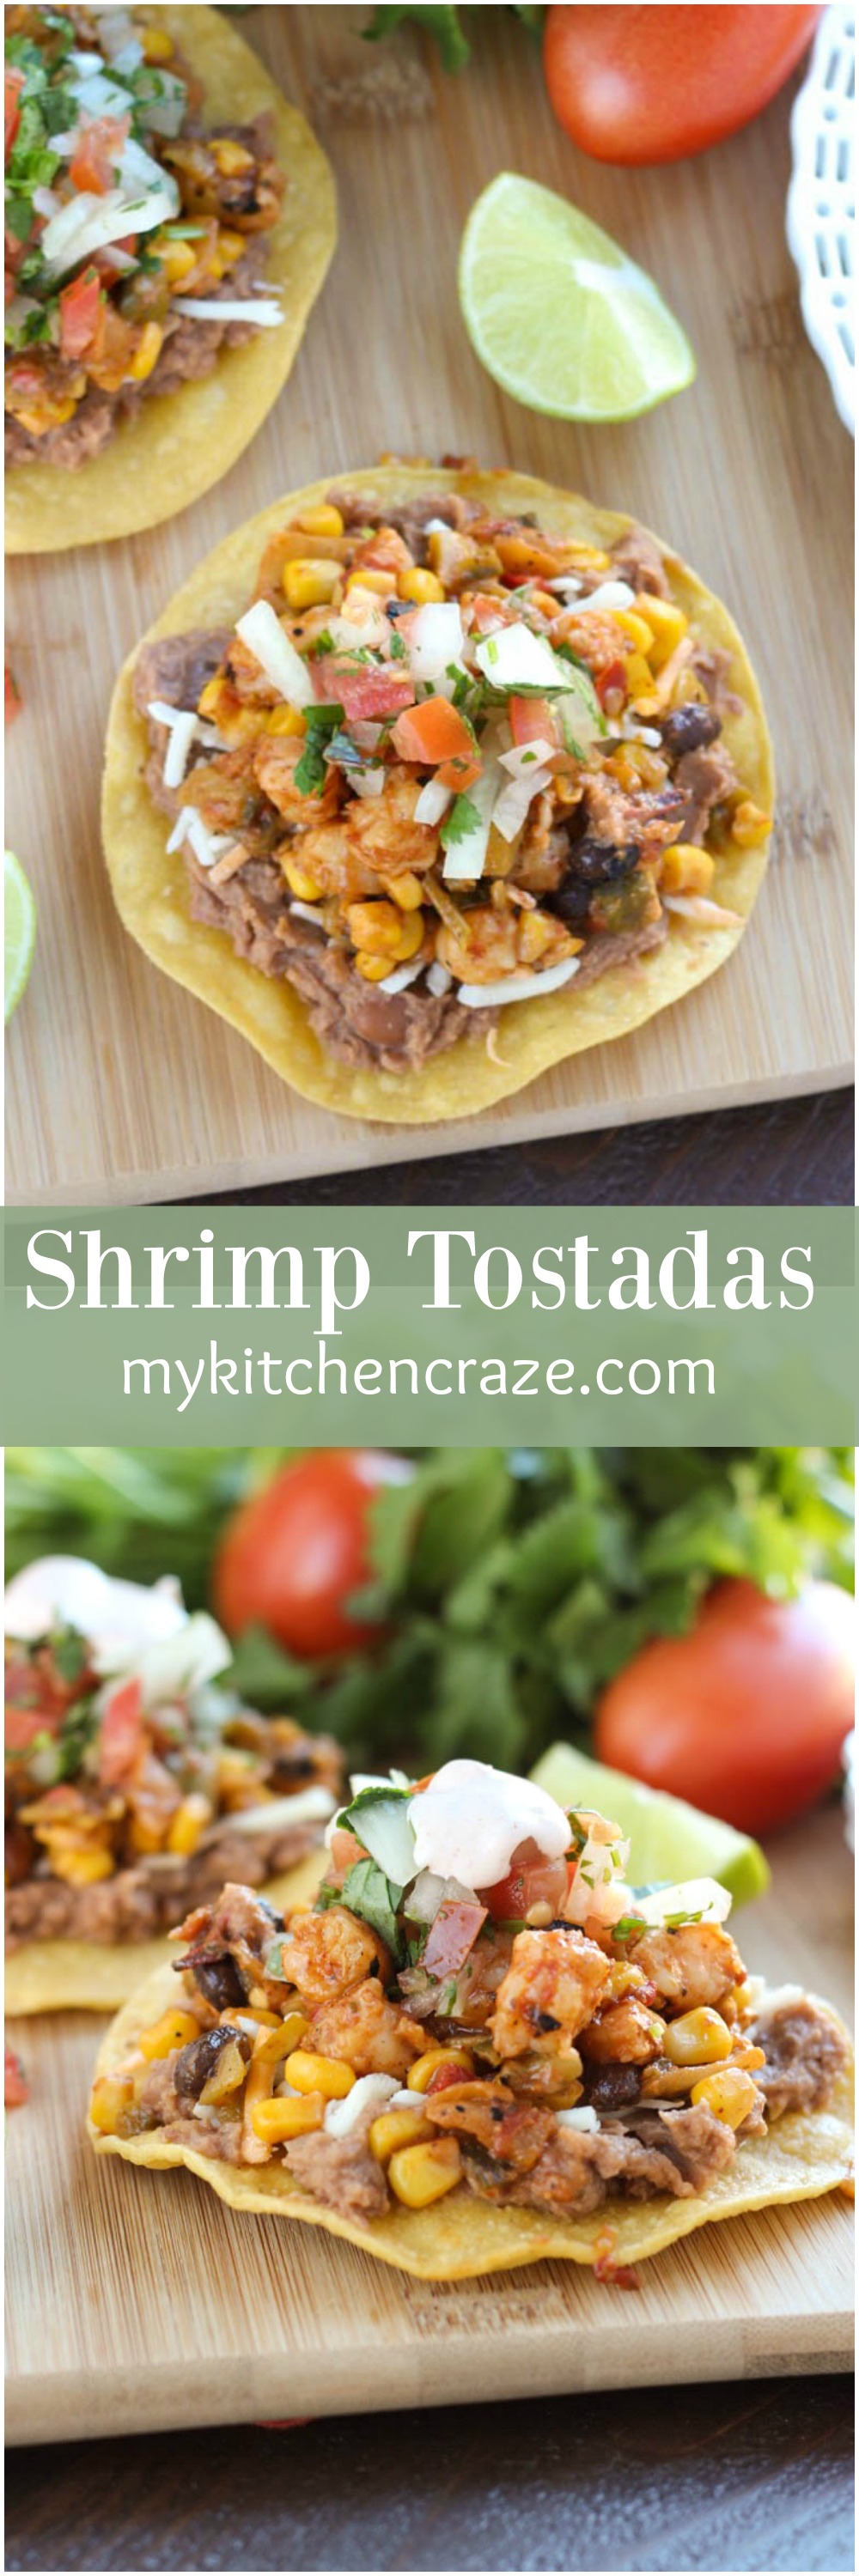 Shrimp Tostadas ~ mykitchencraze.com ~ Enjoy these delicious and scrumptious Shrimp Tostadas in your home. Filled with all sorts of veggies and delicious shrimp. These tostadas will be a winner in your home. #ShrimpItUp [ad]